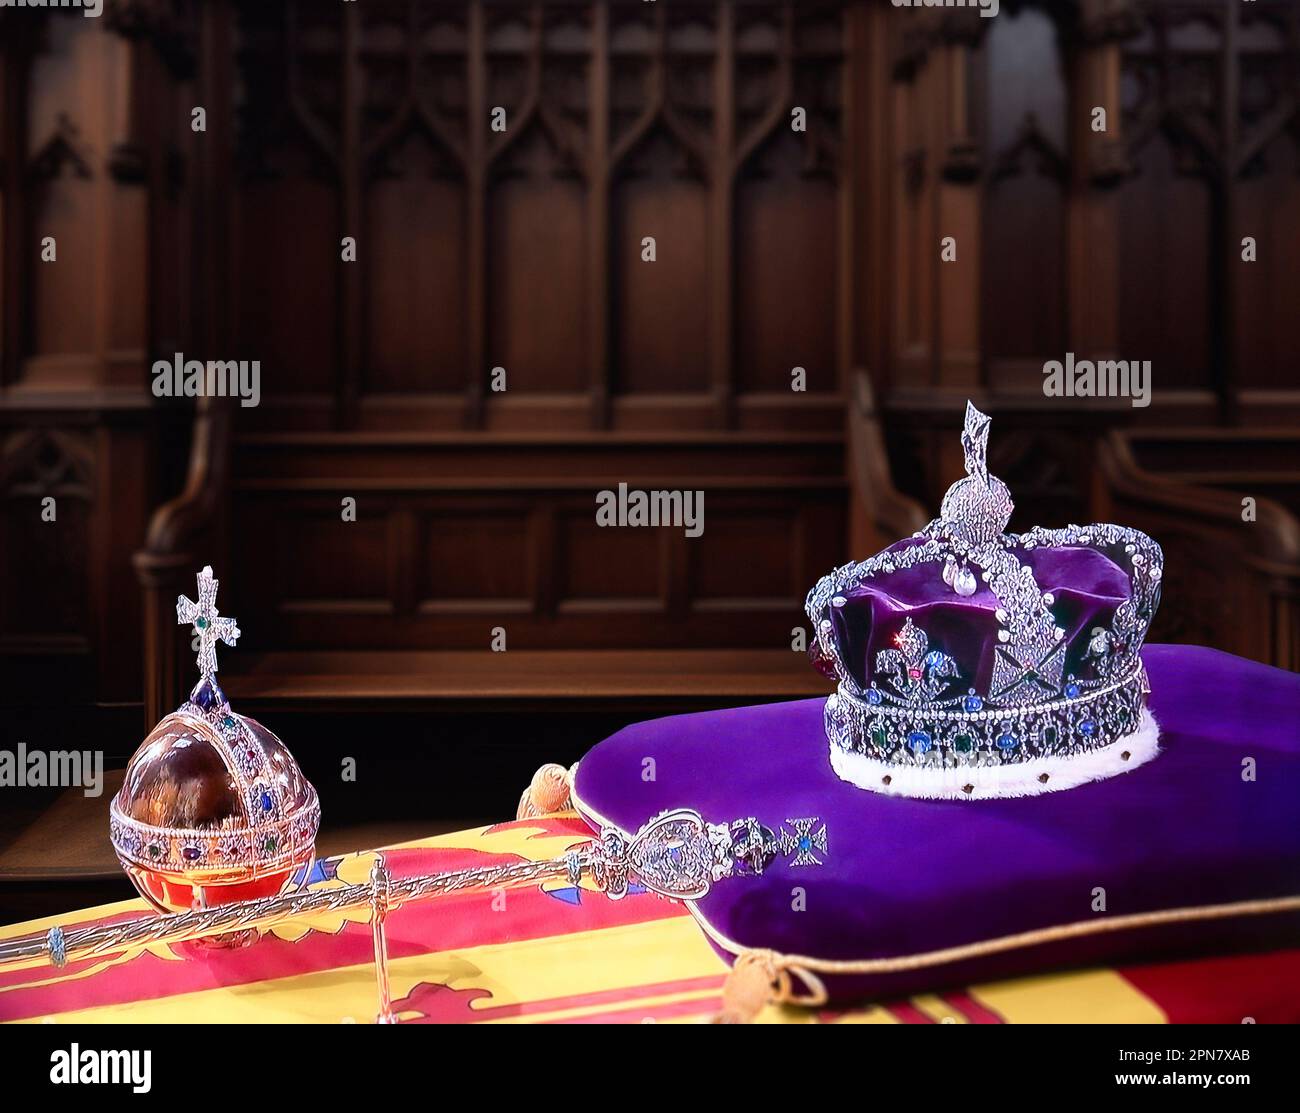 CROWN JEWELS at HM Queen Elizabeth II funeral service, inside interior at St. George’s Chapel Windsor, with the Monarch’s Imperial State Crown, Sceptre and Orb on her Majesty’s coffin, the symbols of the British Sovereign displayed during the funeral service, with conceptual harmonious background.  19/09/2022  St. Georges Chapel Windsor Berkshire UK. Unique digital image merge of UHD broadcast capture. Stock Photo